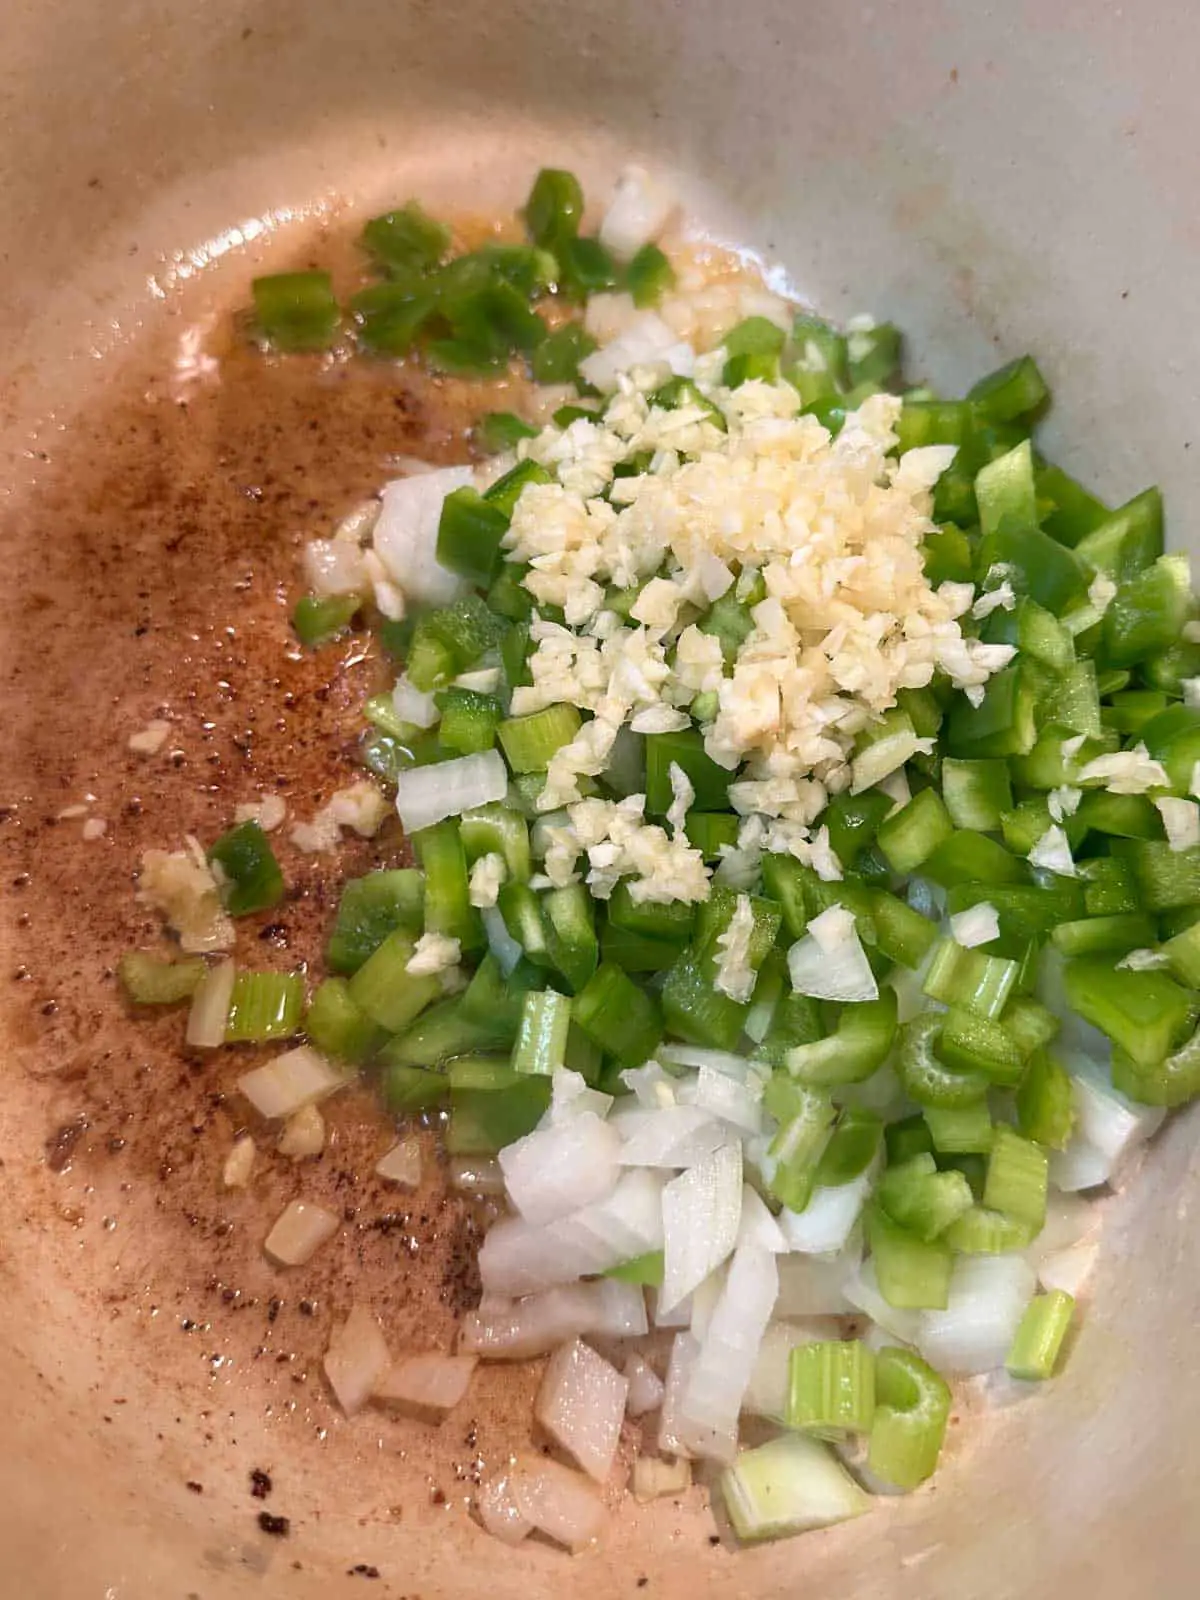 A red Dutch oven containing melted butter and diced celery, green bell peppers, onion, and minced garlic.